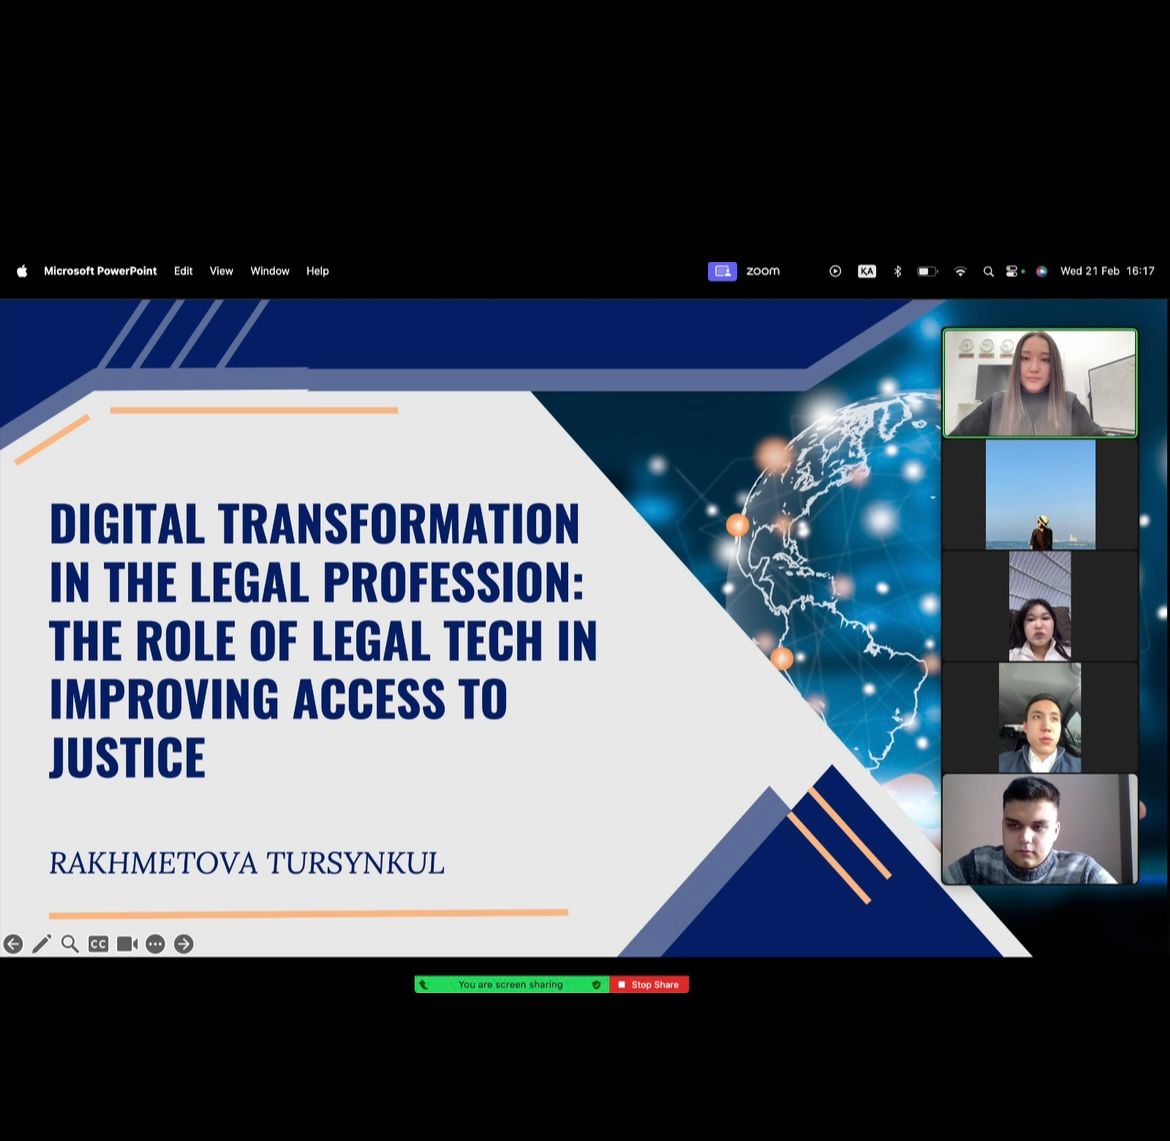 DIGITAL TRANSFORMATION IN THE LEGAL PROFESSION: THE ROLE OF LEGAL TECH IN IMPROVING ACCESS TO JUSTICE